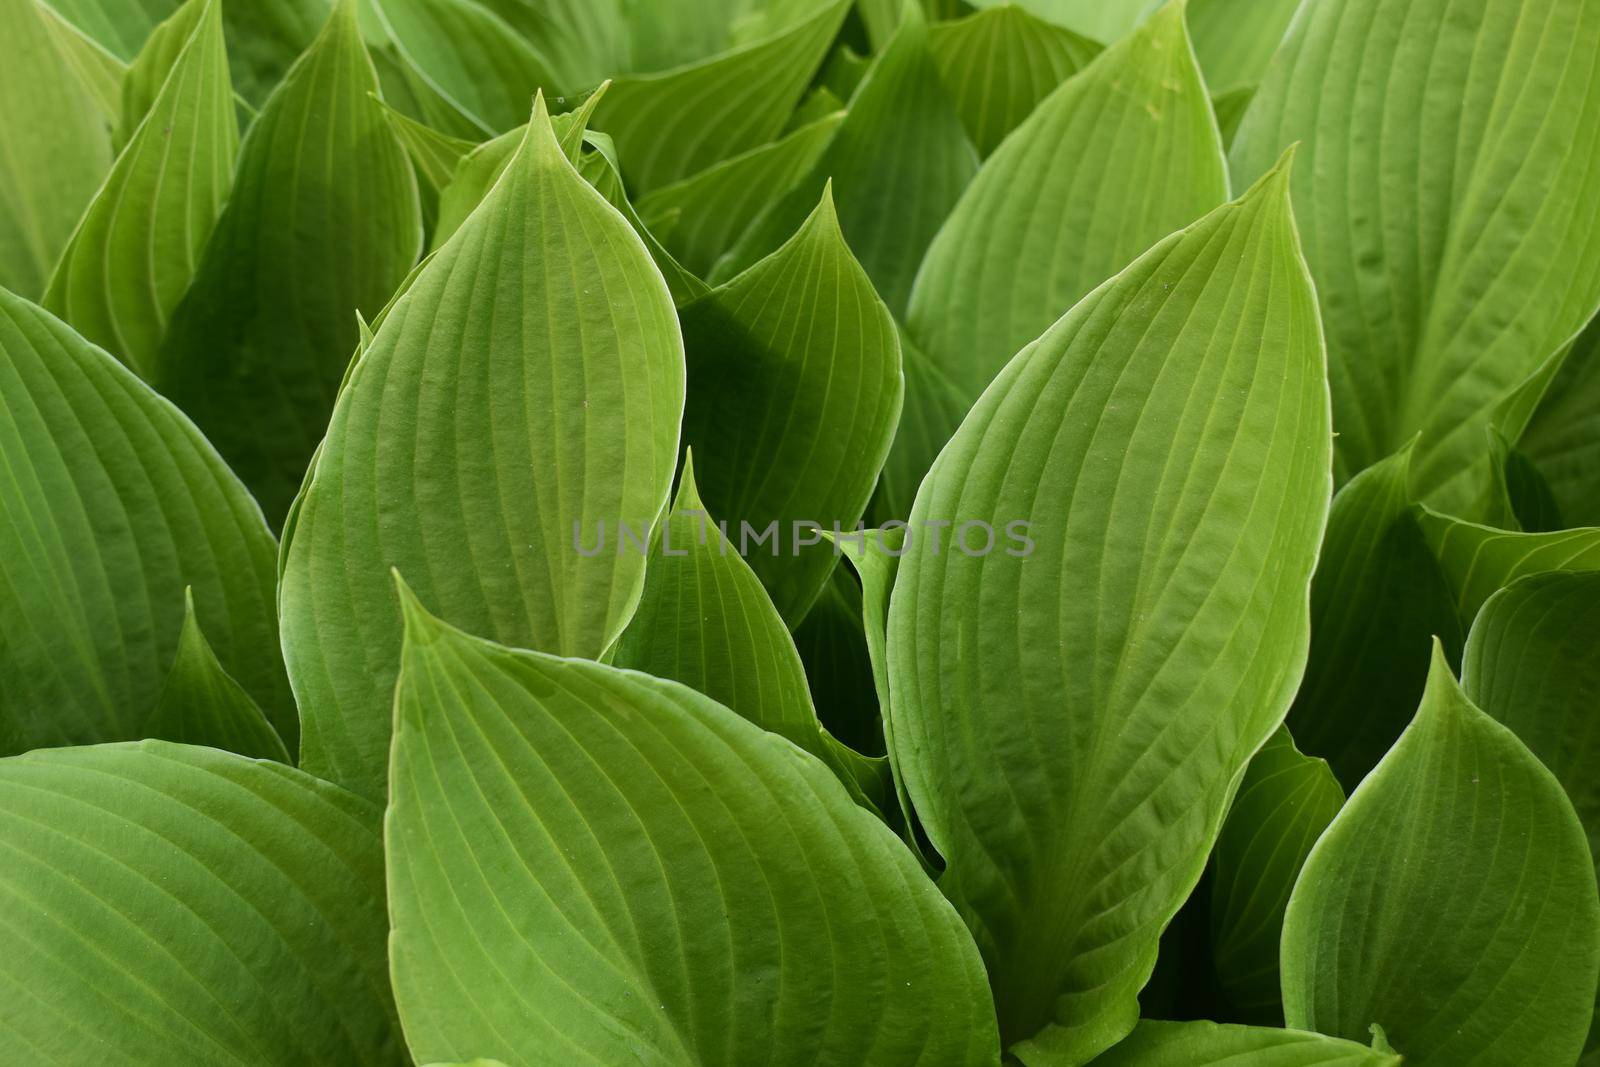 Hosta plant in the garden. Closeup green leaves background. Hosta - an ornamental plant for landscaping park and garden design